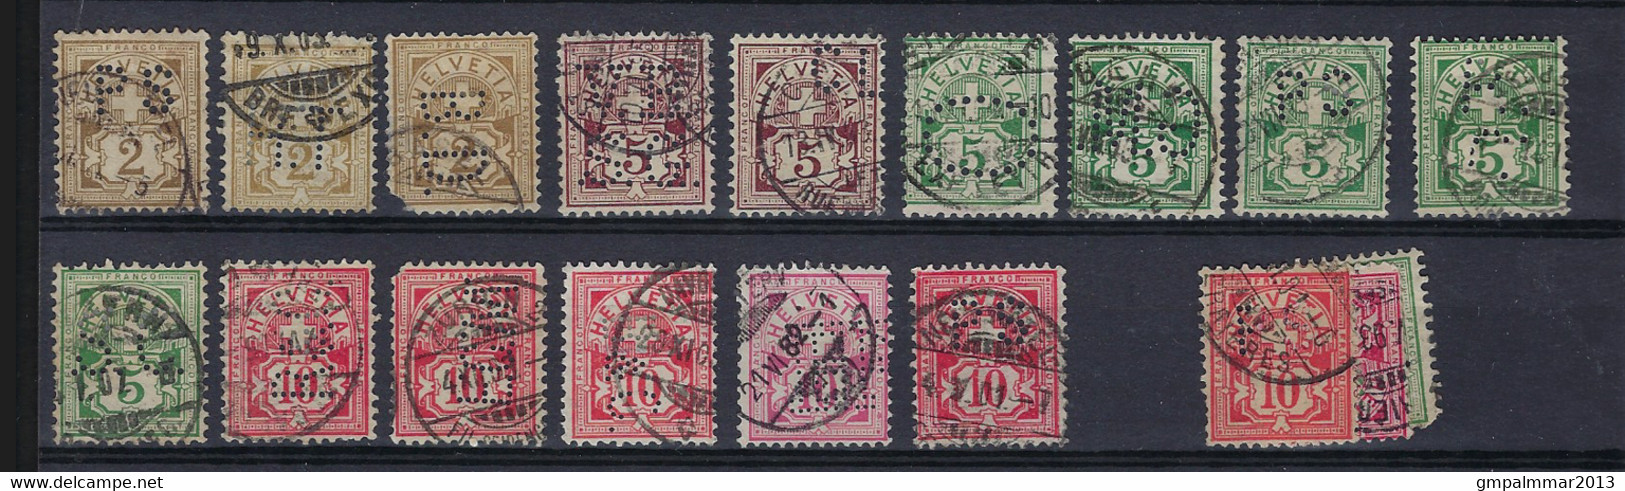 PERFIN / PERFO Suisse  /  Switzerland  1883   15  Stamps All Different Combinations ; Details See 2 Scans ! LOT 105 - Gezähnt (perforiert)